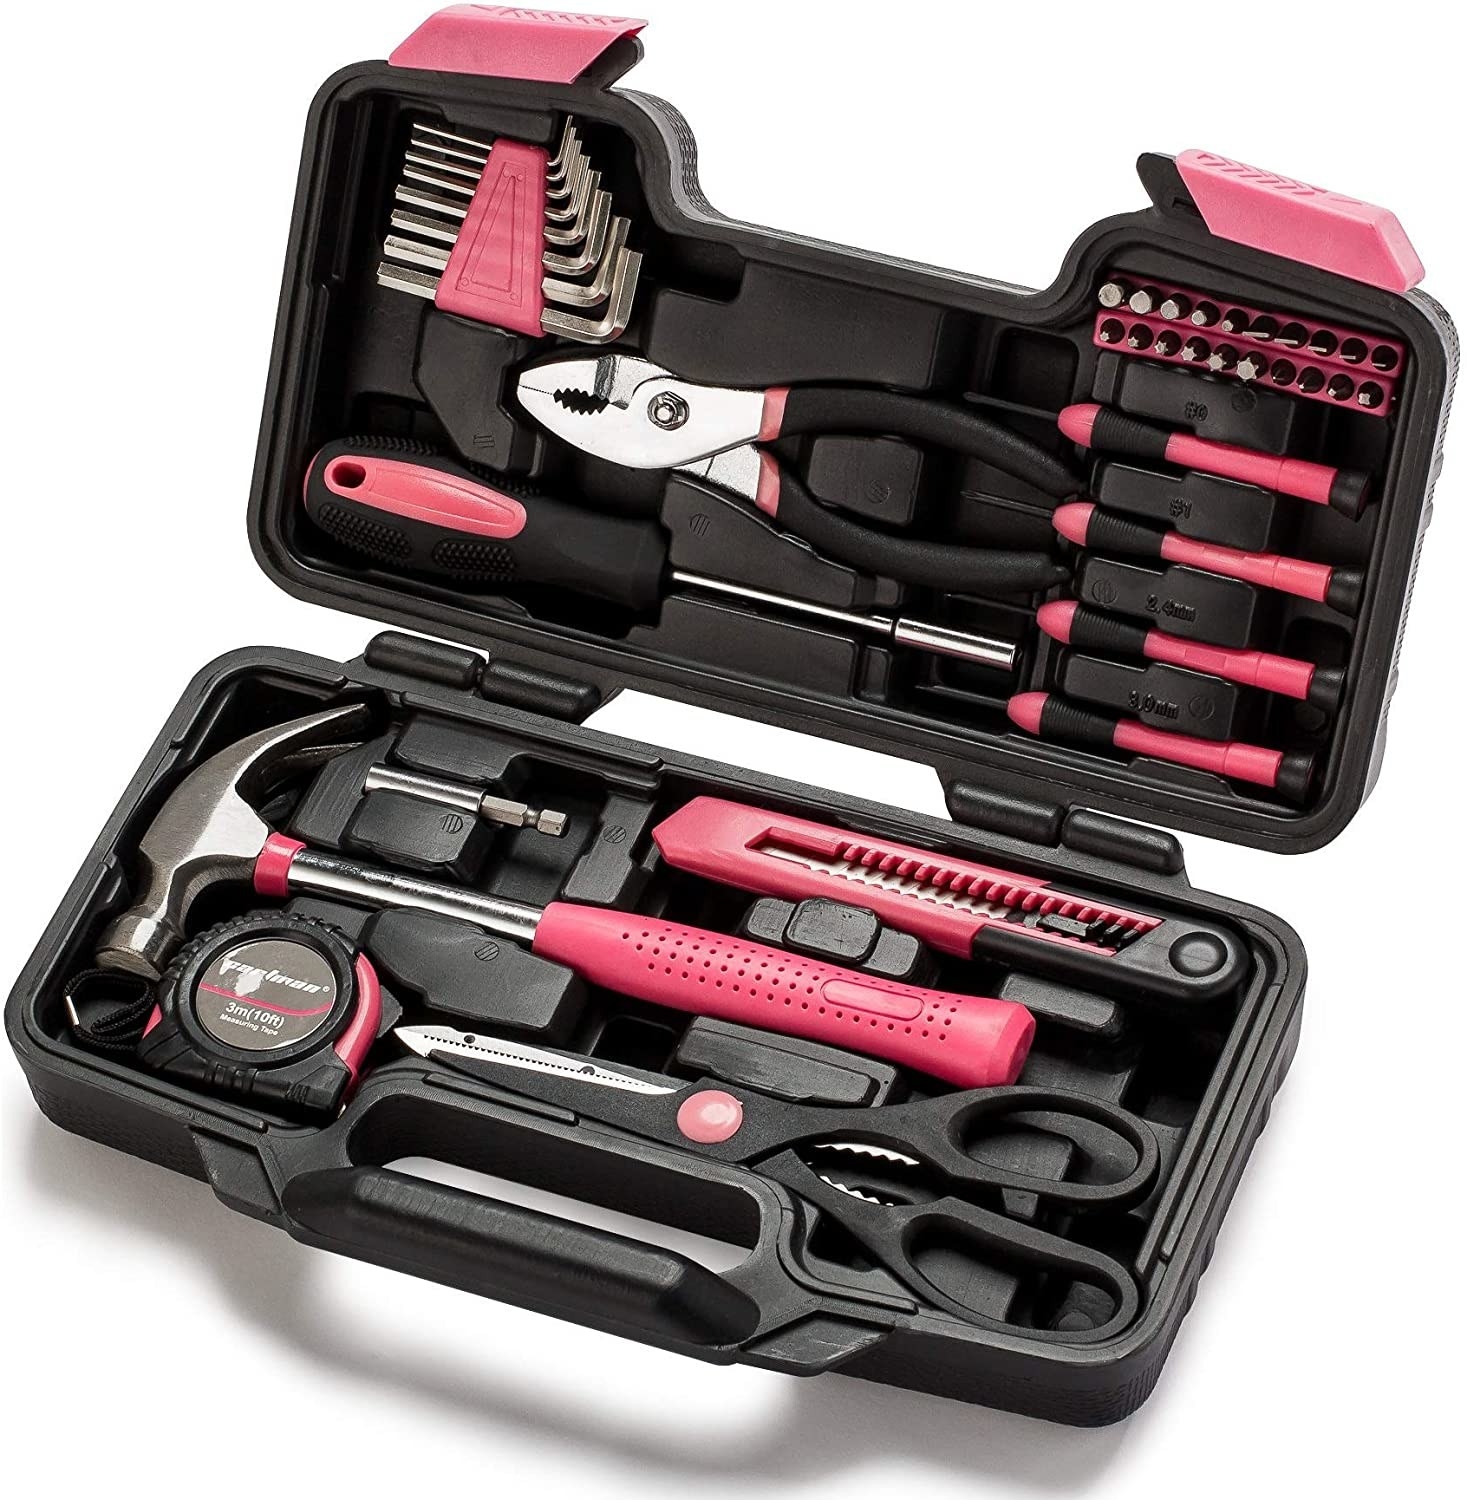 A tool kit in a case